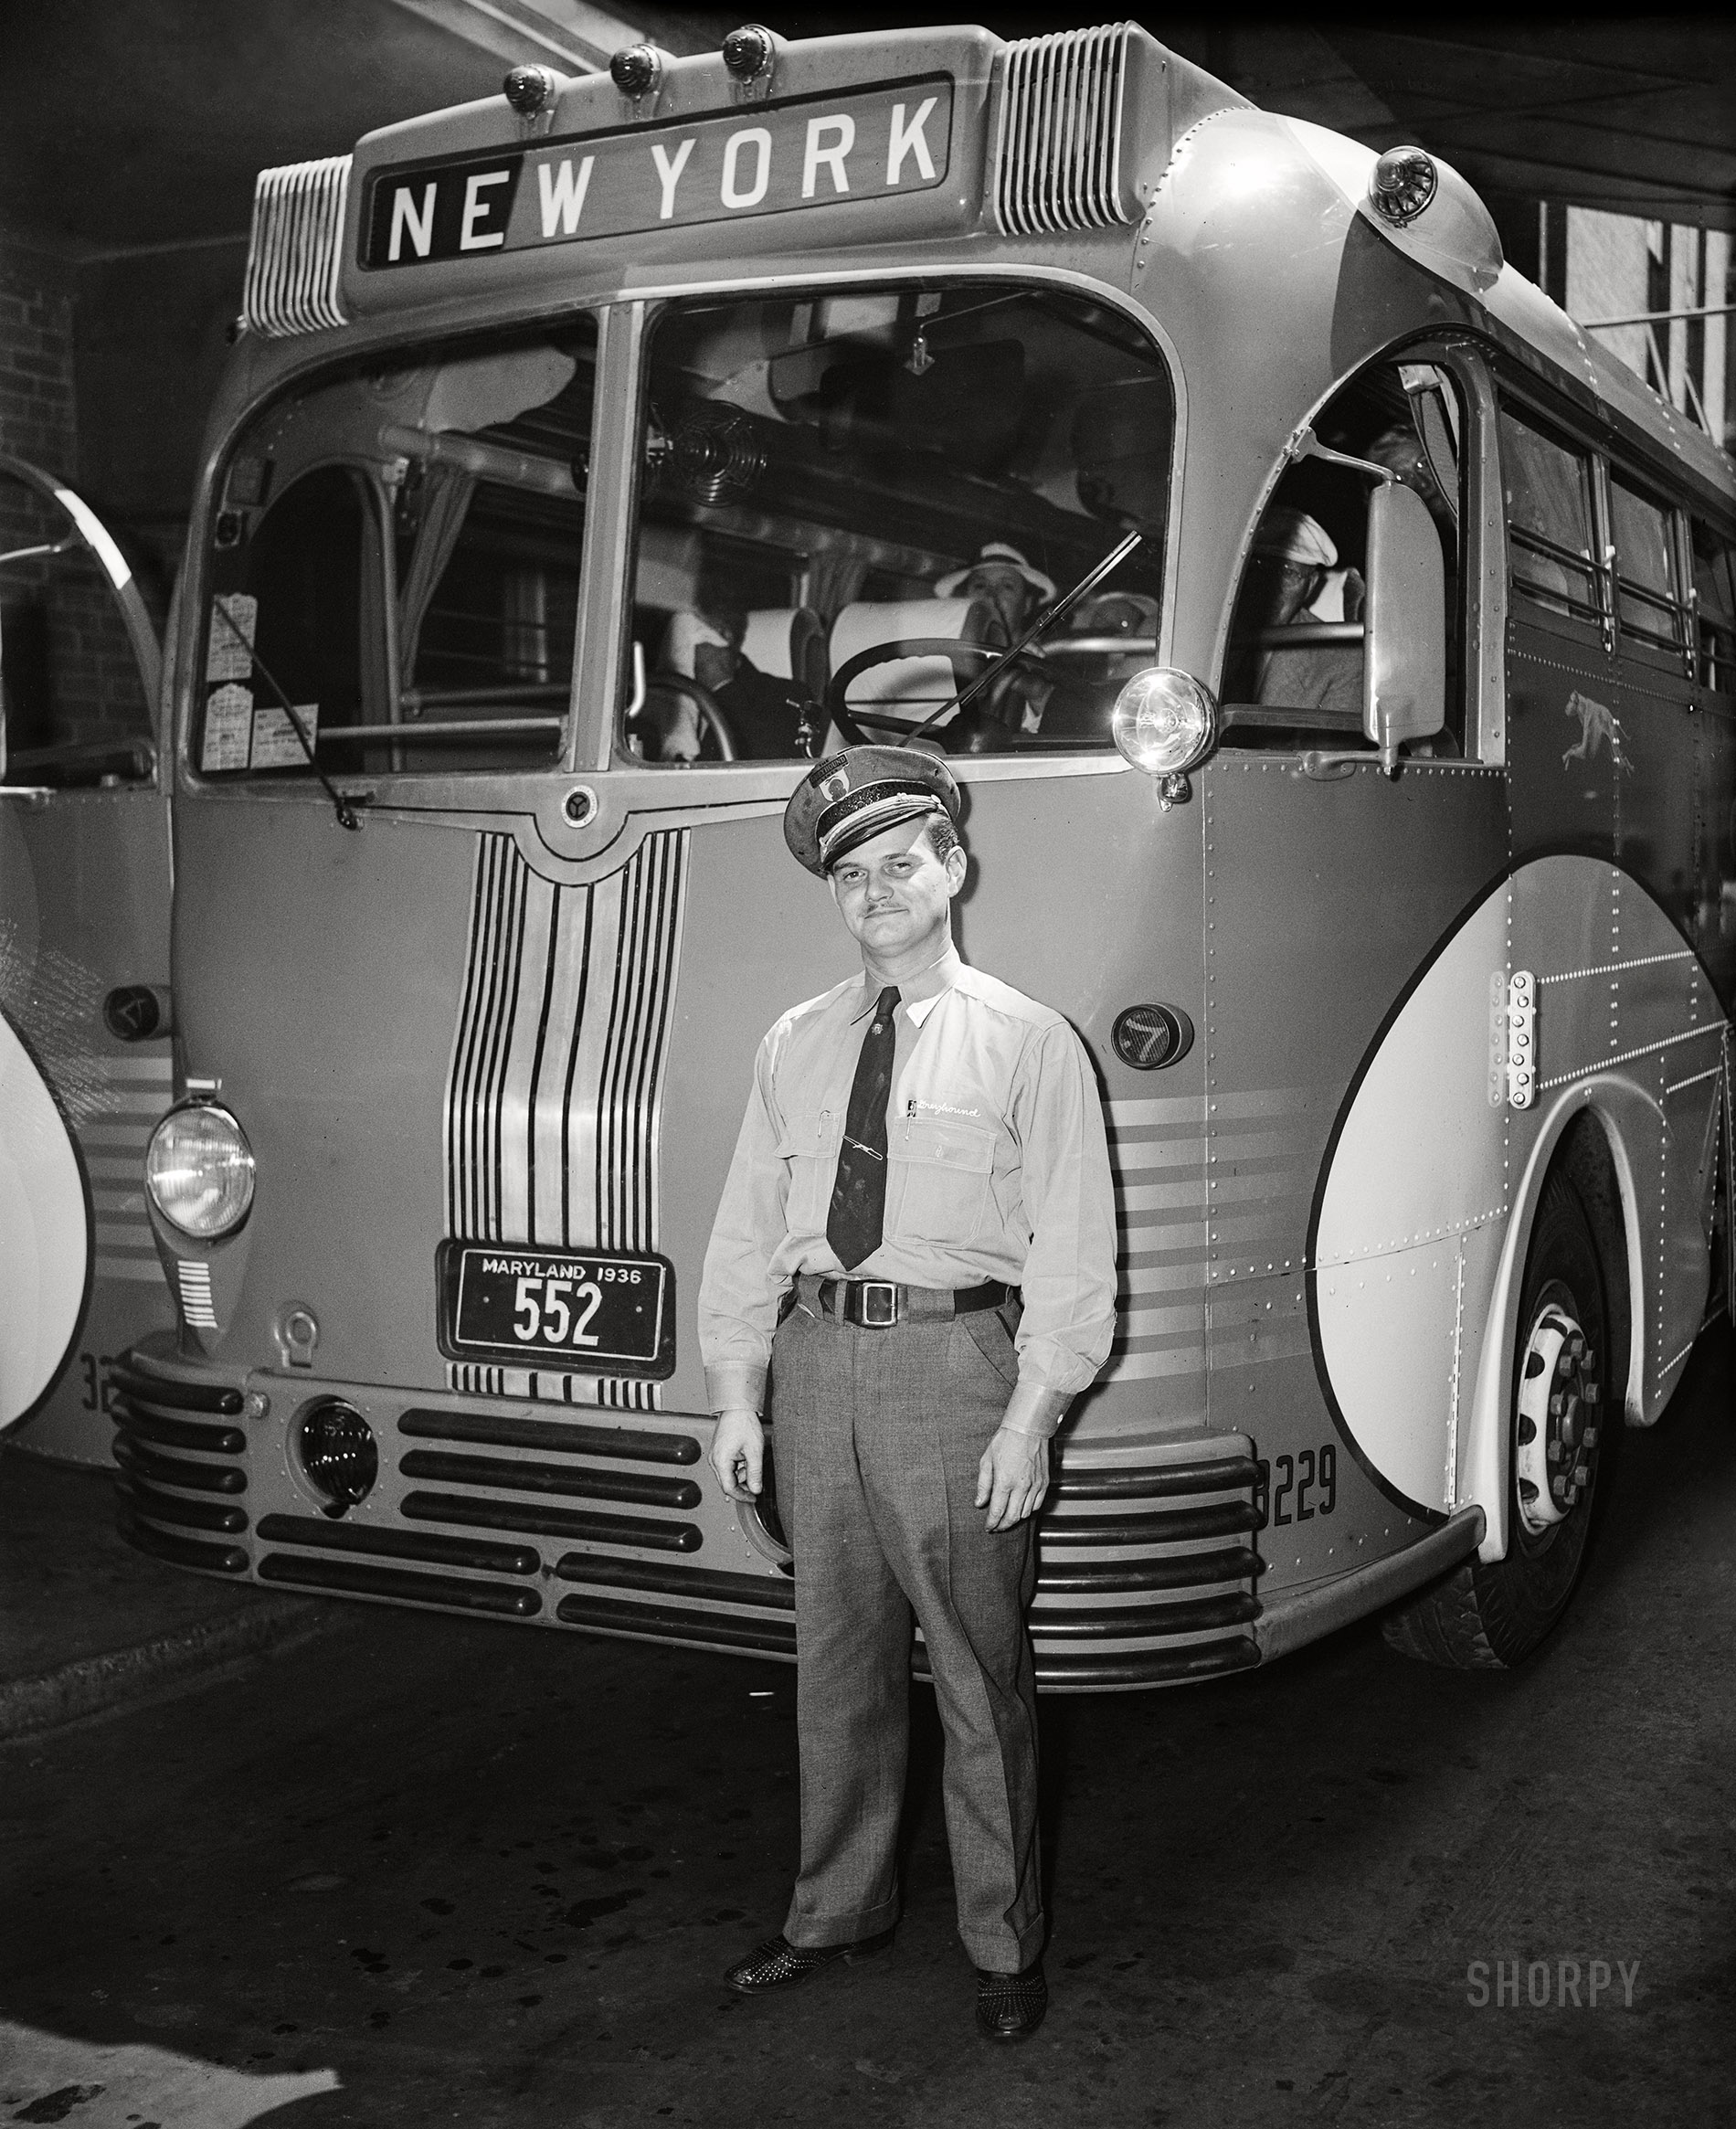 Washington, D.C., 1936. "Bus transportation -- Greyhound Lines driver at station with coach bound for New York." 4x5 inch glass negative, Harris & Ewing Collection. View full size.